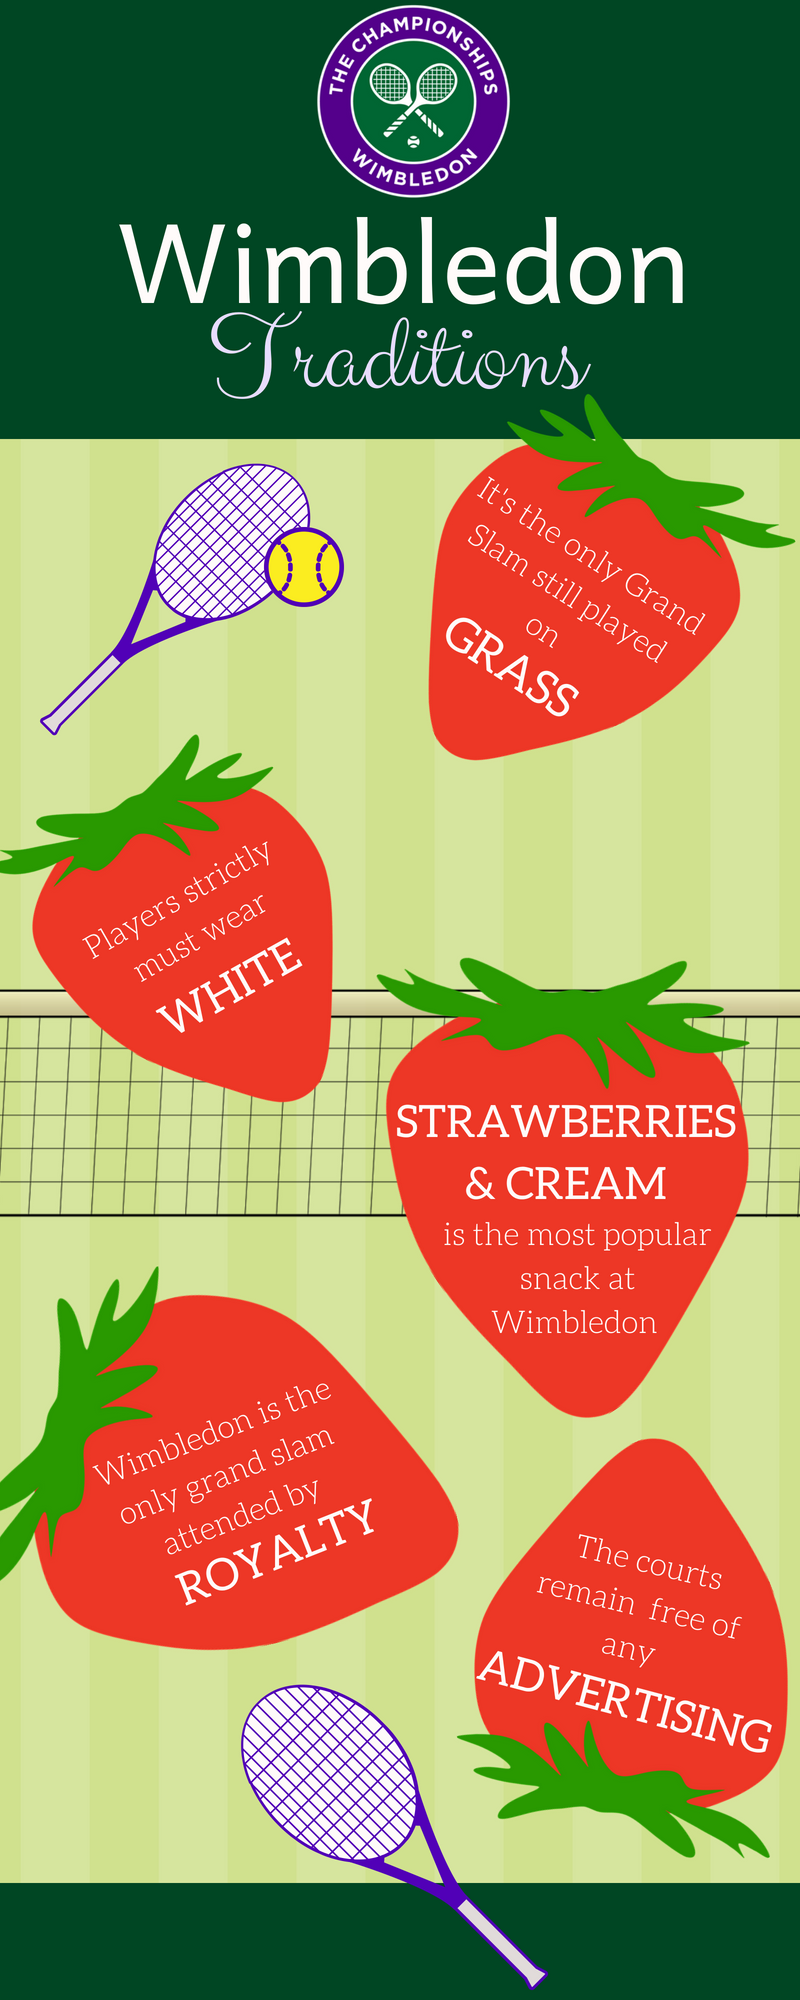 Wimbledon traditions Infographic